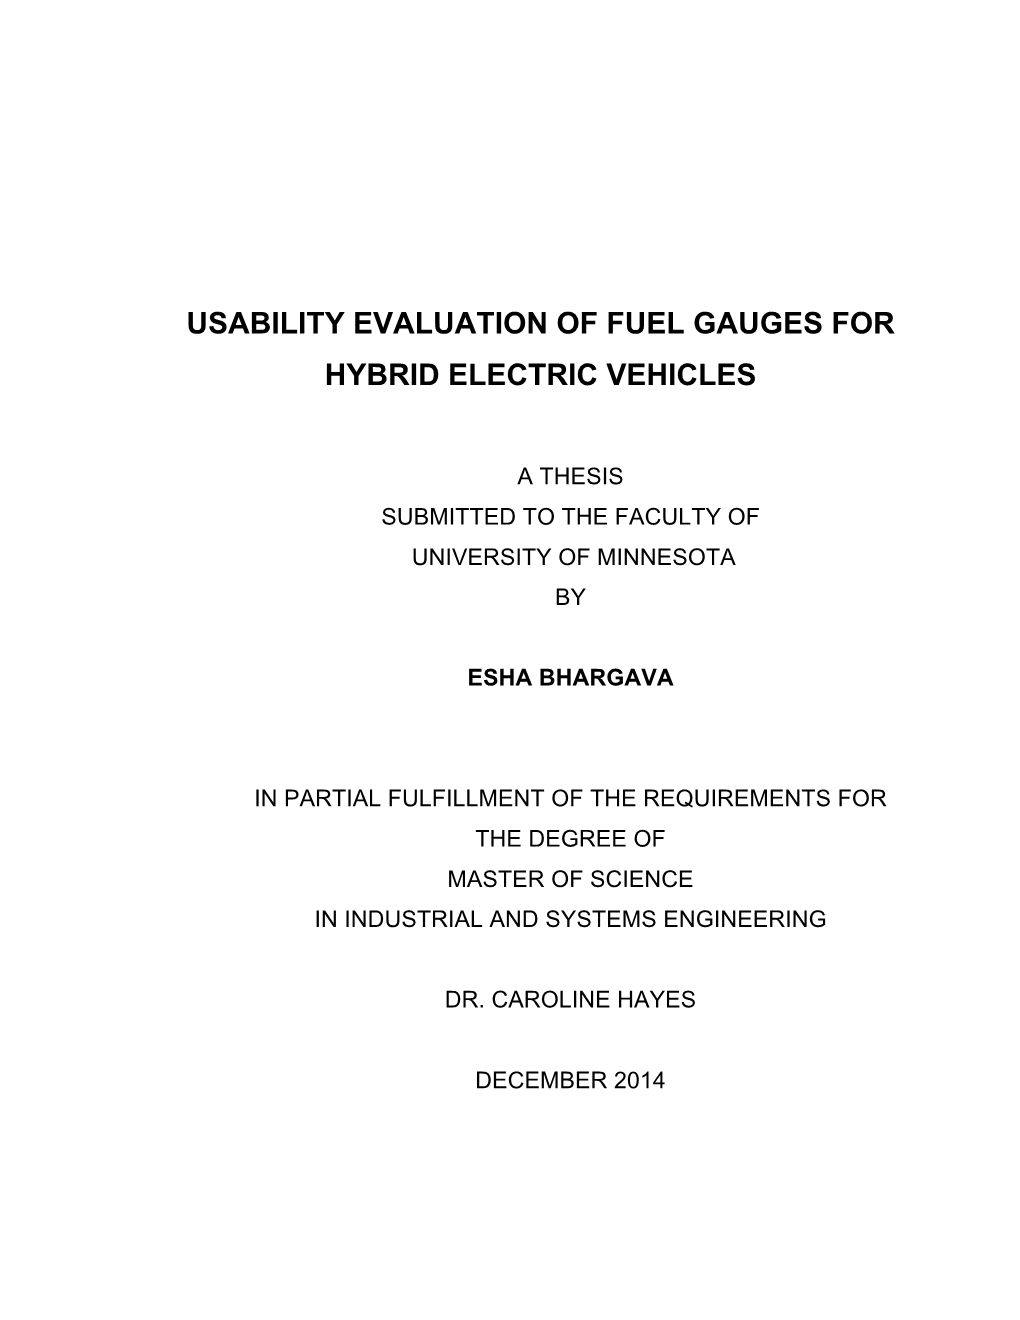 Usability Evaluation of Fuel Gauges for Hybrid Electric Vehicles